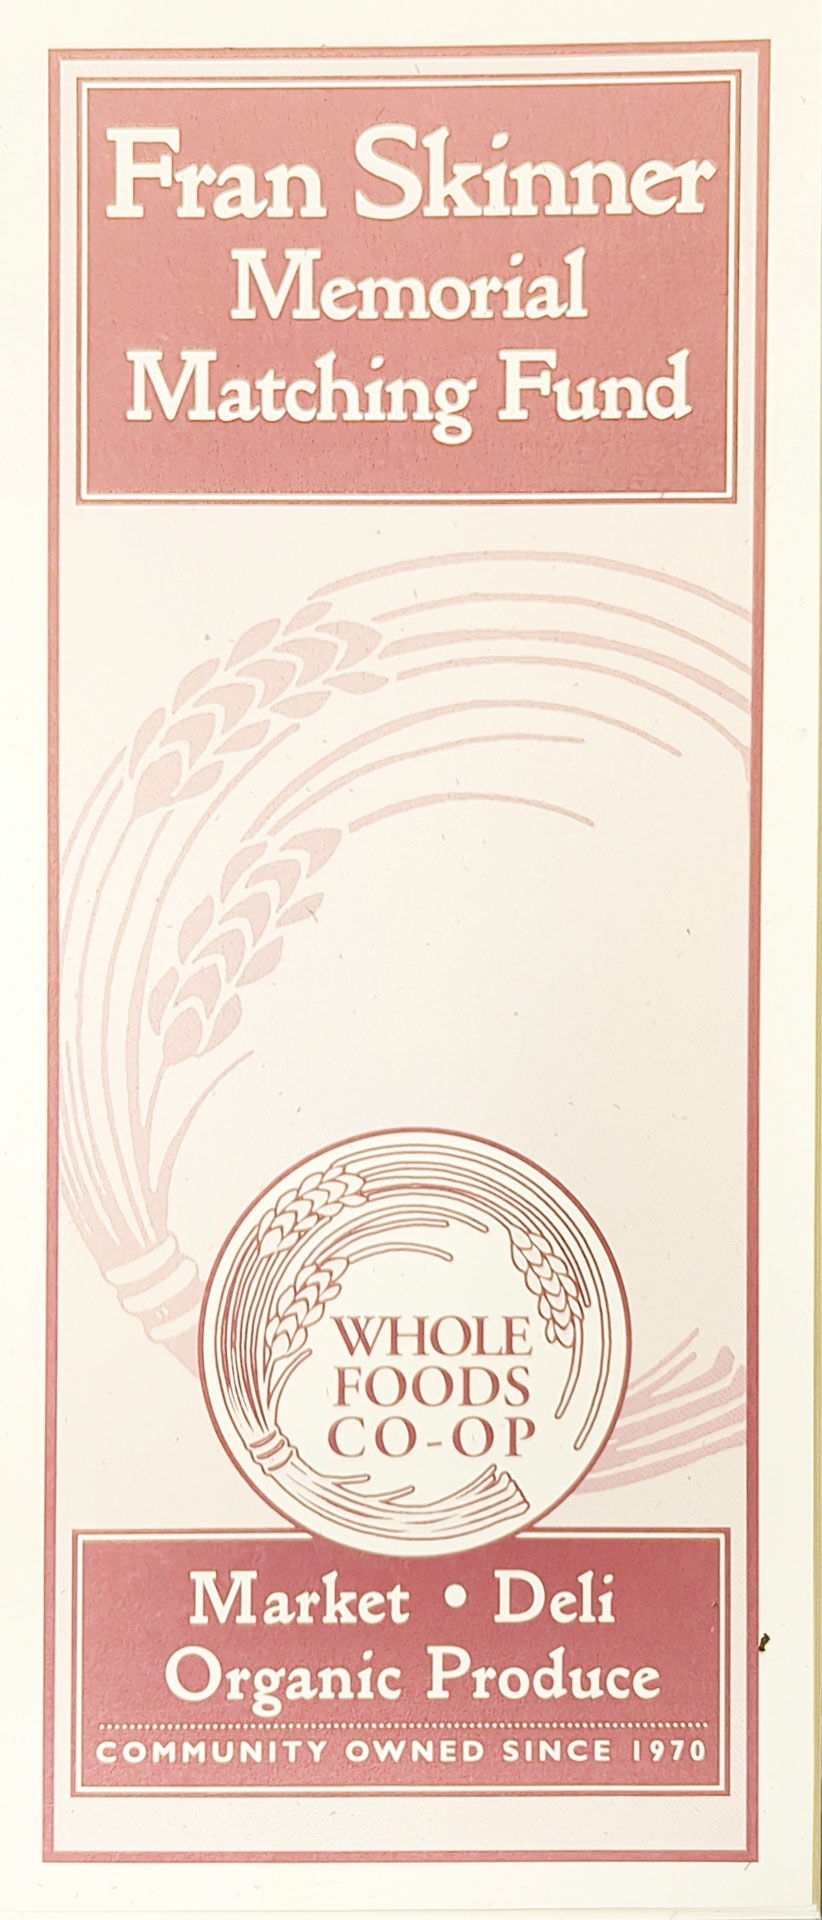 A vintage-style poster in sepia tones for the Fran Skinner Memorial Matching Fund, run by Whole Foods Co-op. The design includes a wheat graphic and text promoting organic produce at the market and deli, emphasizing community ownership since 1970. Proudly presented by Whole Foods Coop Duluth MN.